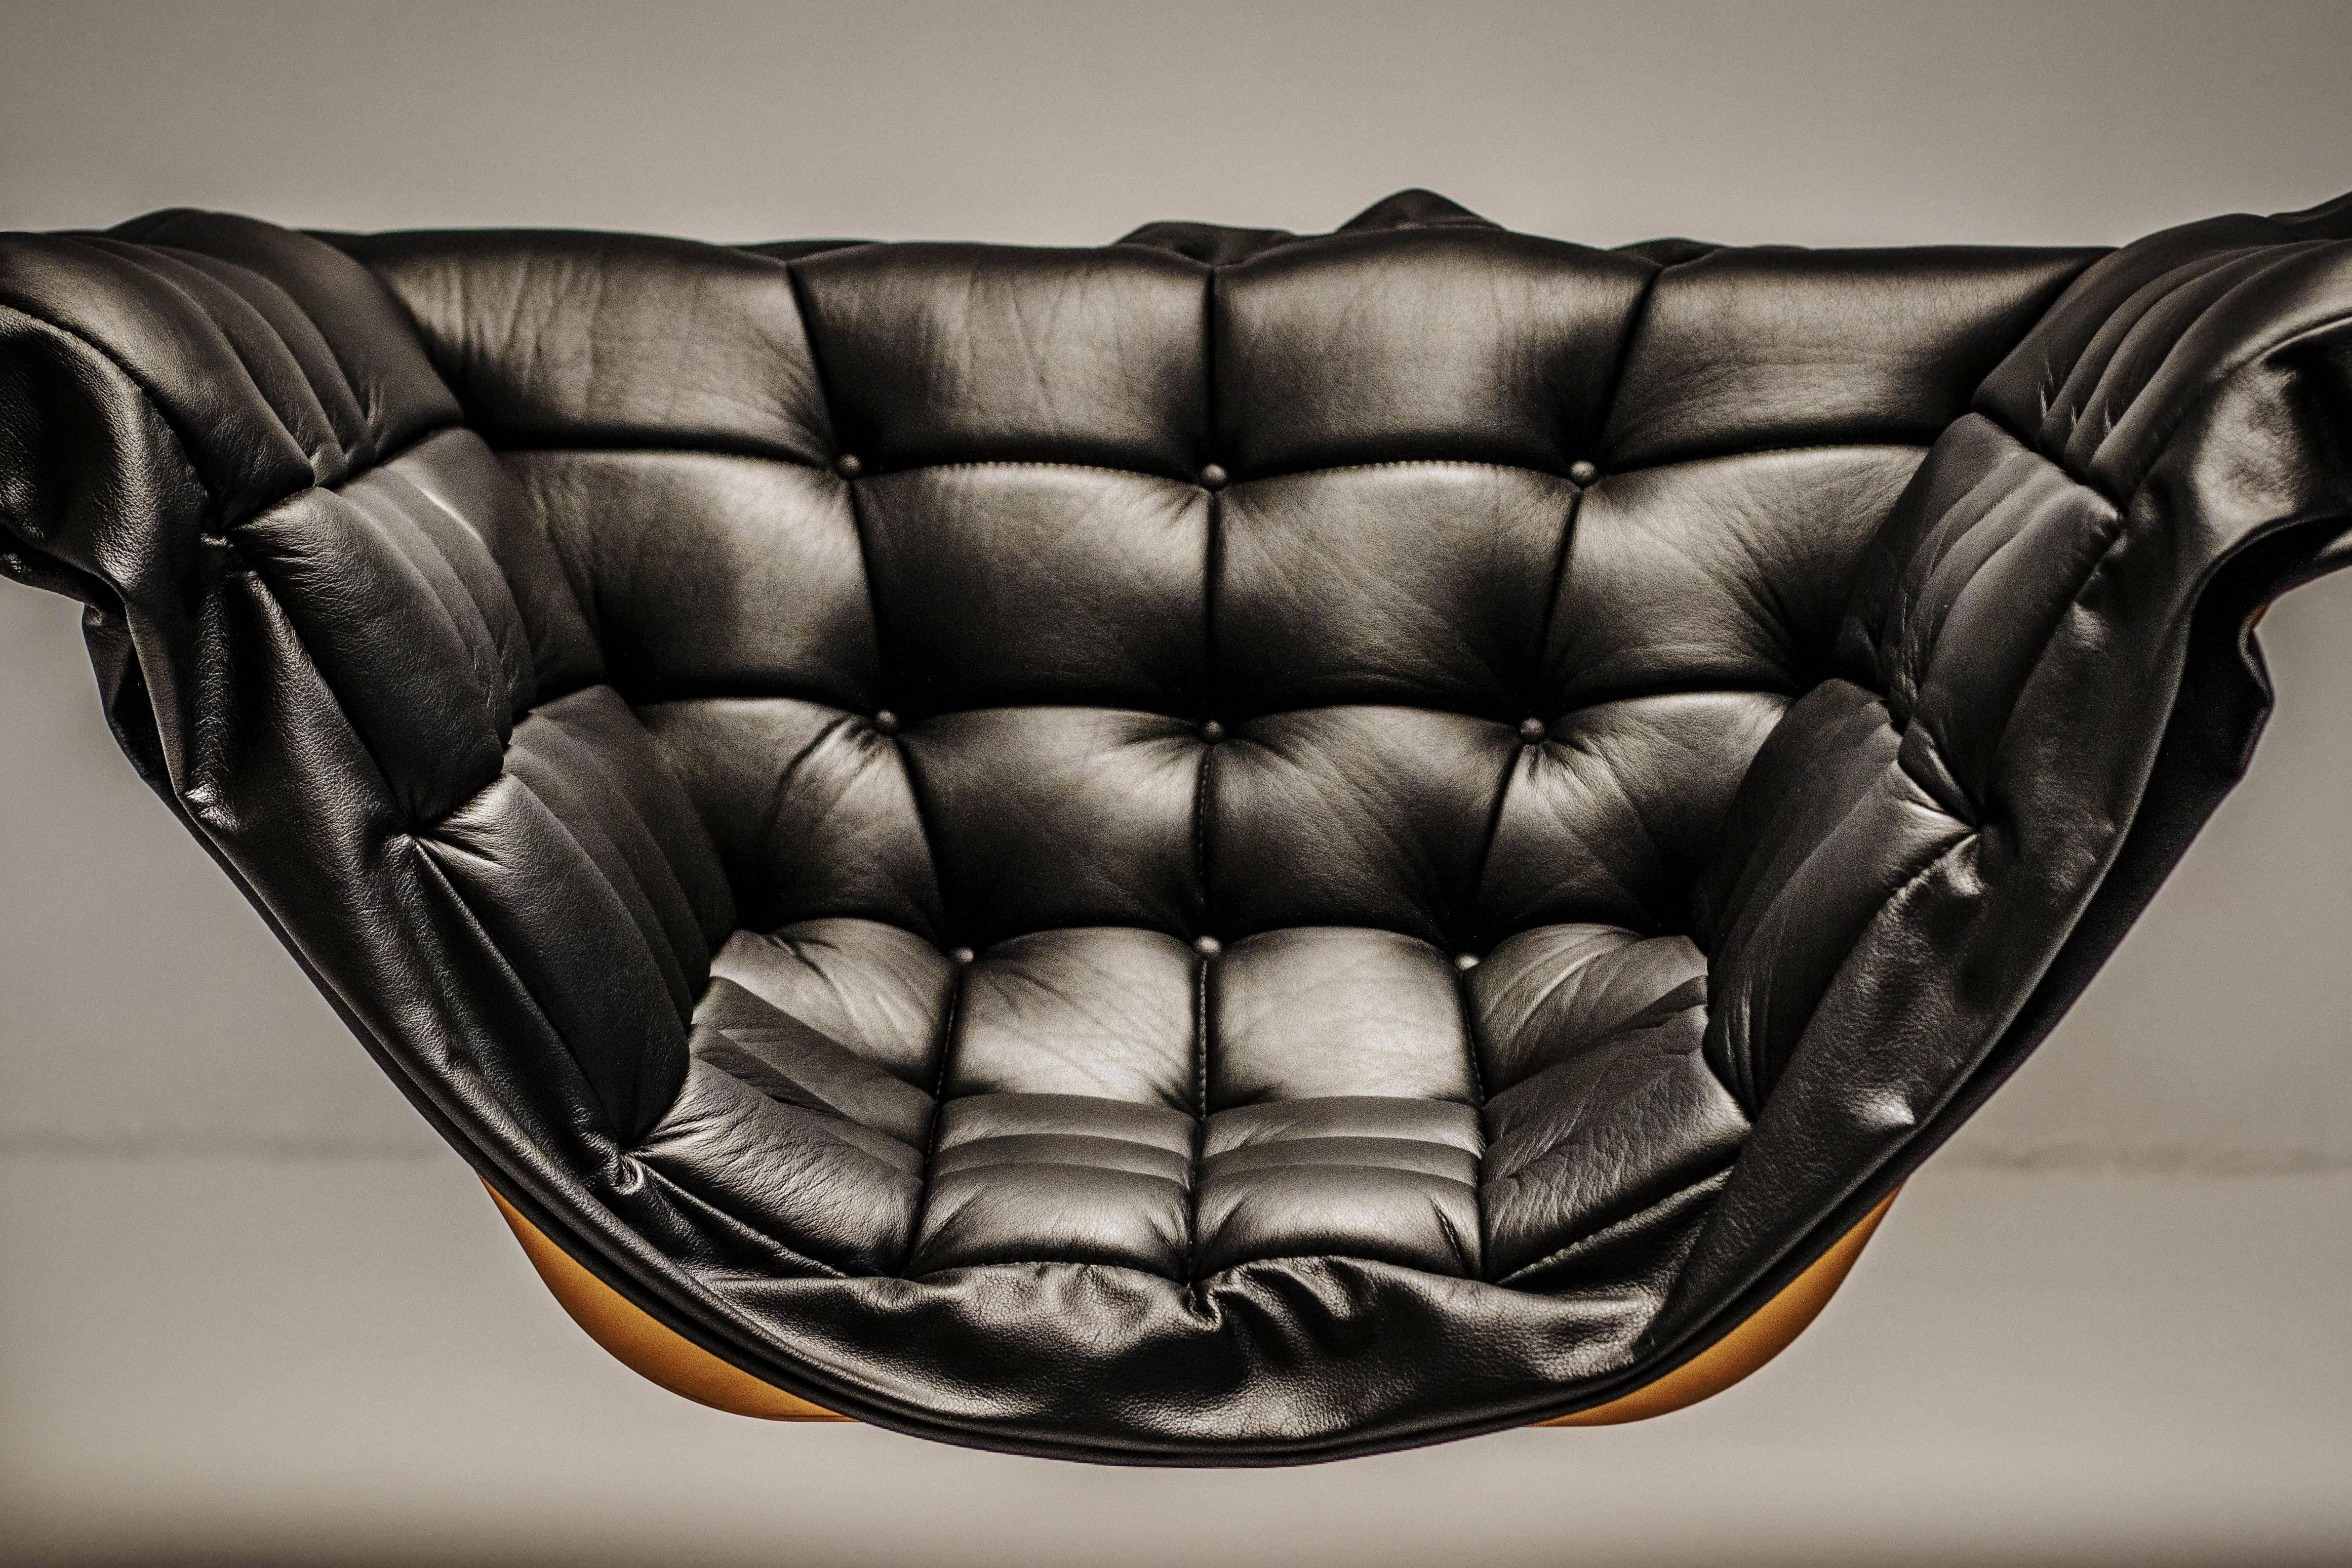 Orbital armchair was designed by Parisian design studio Harow. The sleek bronze skeletal structure and leather upholstery is a classic coupling of luxury materials with an edgy and industrial design. It is a limited edition piece that can also be